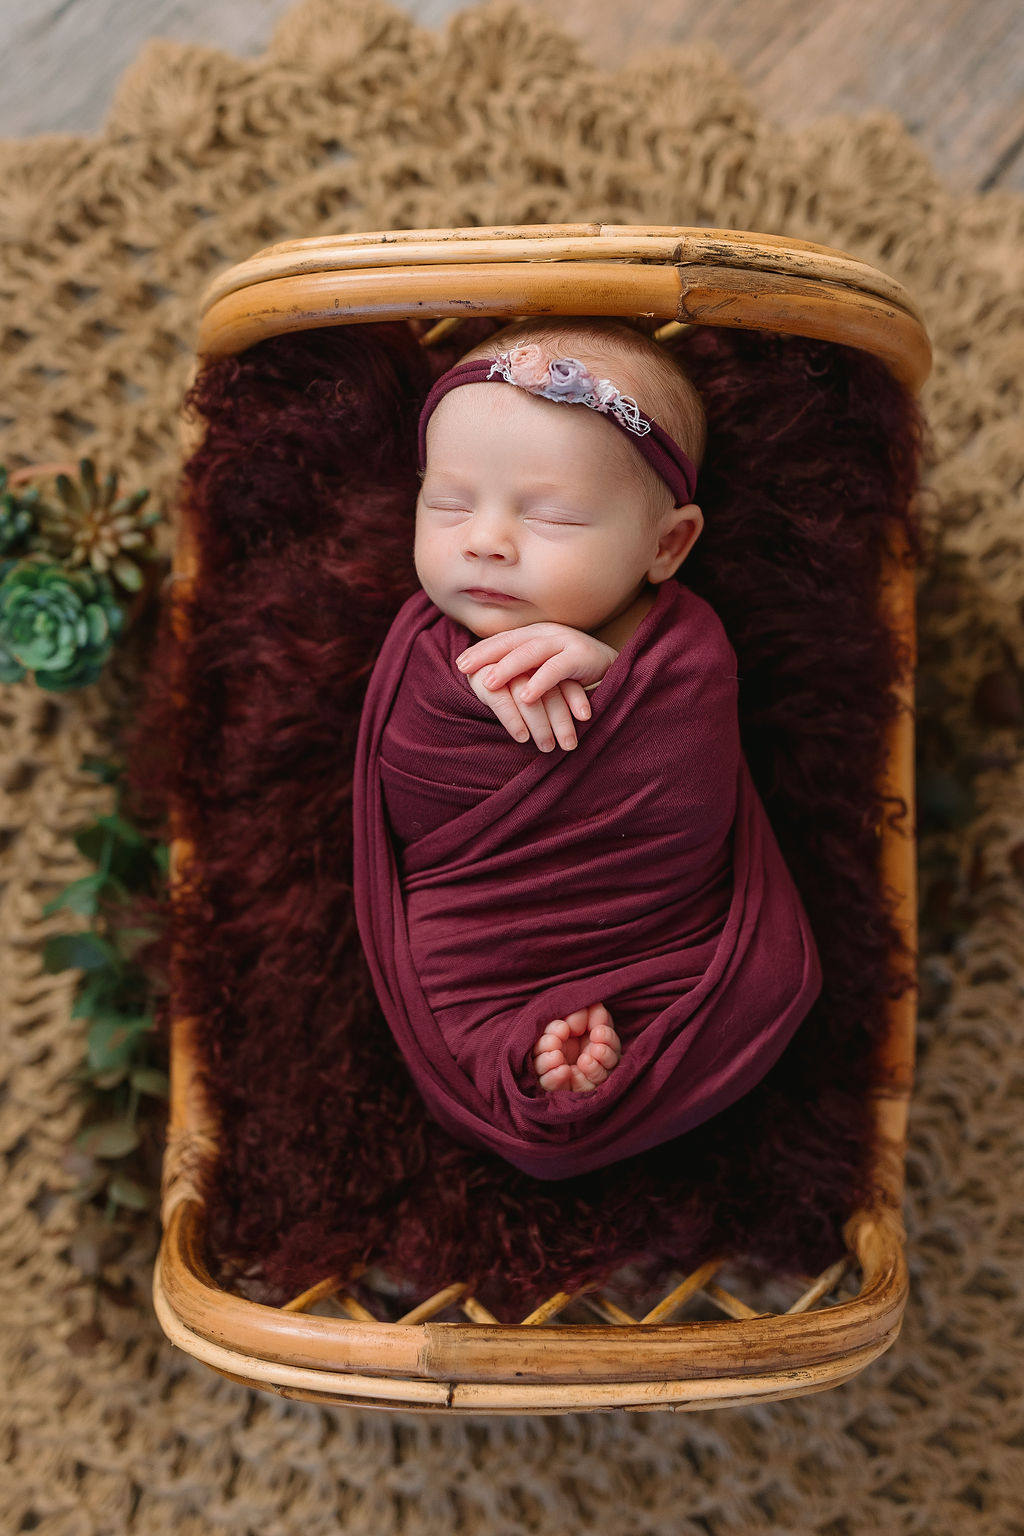 newborn sleeps while swaddled in purple in a wicker bed baby boutique charlottesville va